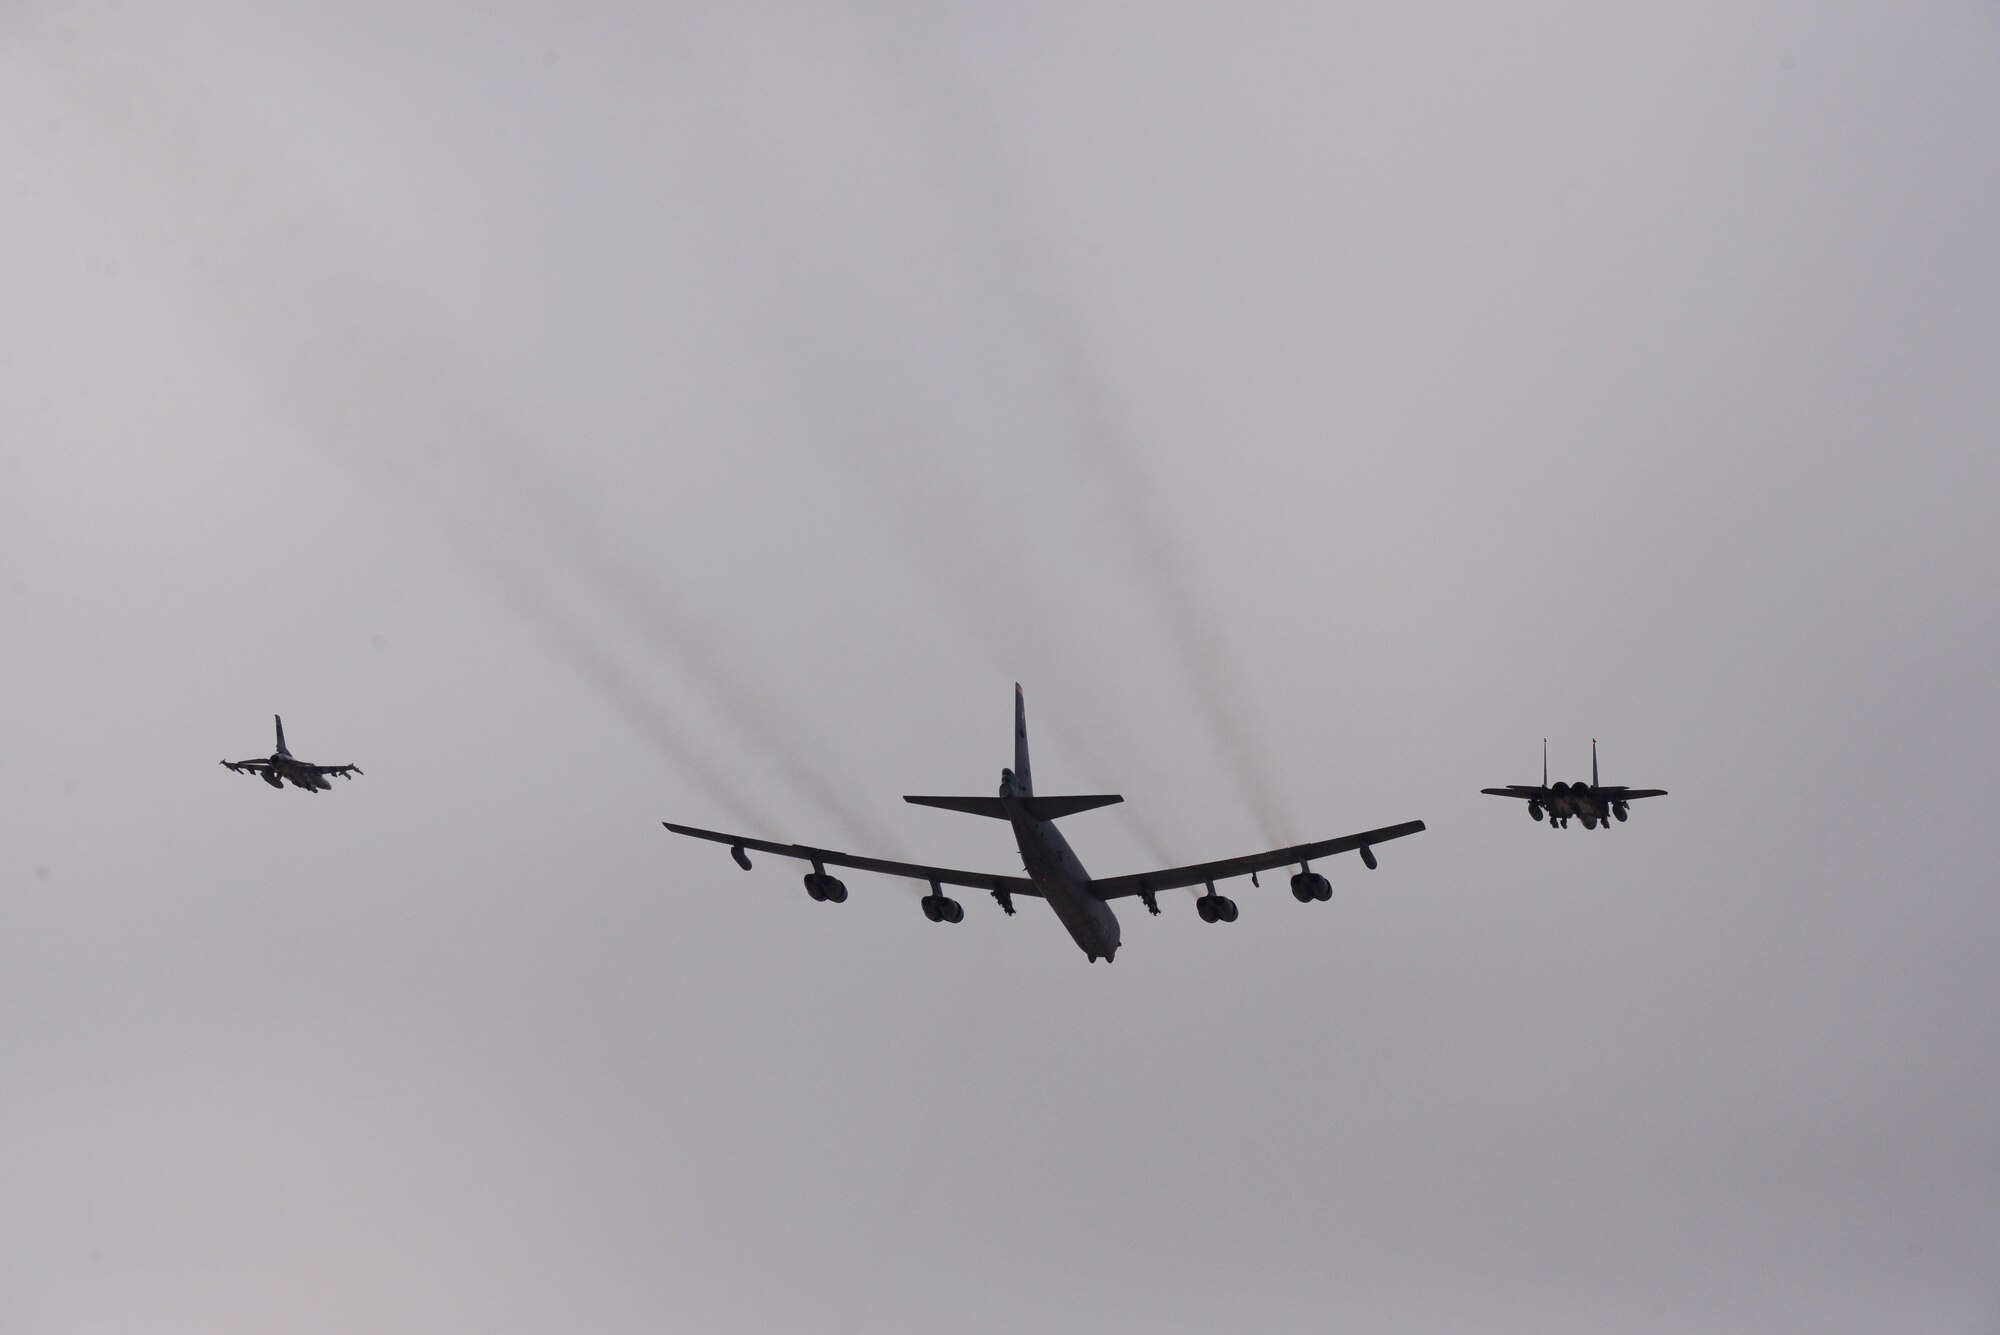 A U.S. Air Force B-52 Stratofortress from Andersen Air Force Base, Guam, conducted a low-level flight in the vicinity of Osan, South Korea, in response to recent provocative action by North Korea Jan. 10, 2016. The B-52 was joined by a South Korean F-15 Slam Eagle and a U.S. Air Force F-16 Fighting Falcon. The B-52 is a long-range, heavy bomber that can fly up to 50,000 feet and has the capability to carry 70,000 pounds of nuclear or precision guided conventional ordnance with worldwide precision navigation capability. (U.S. Air Force photo/Staff Sgt. Amber Grimm)